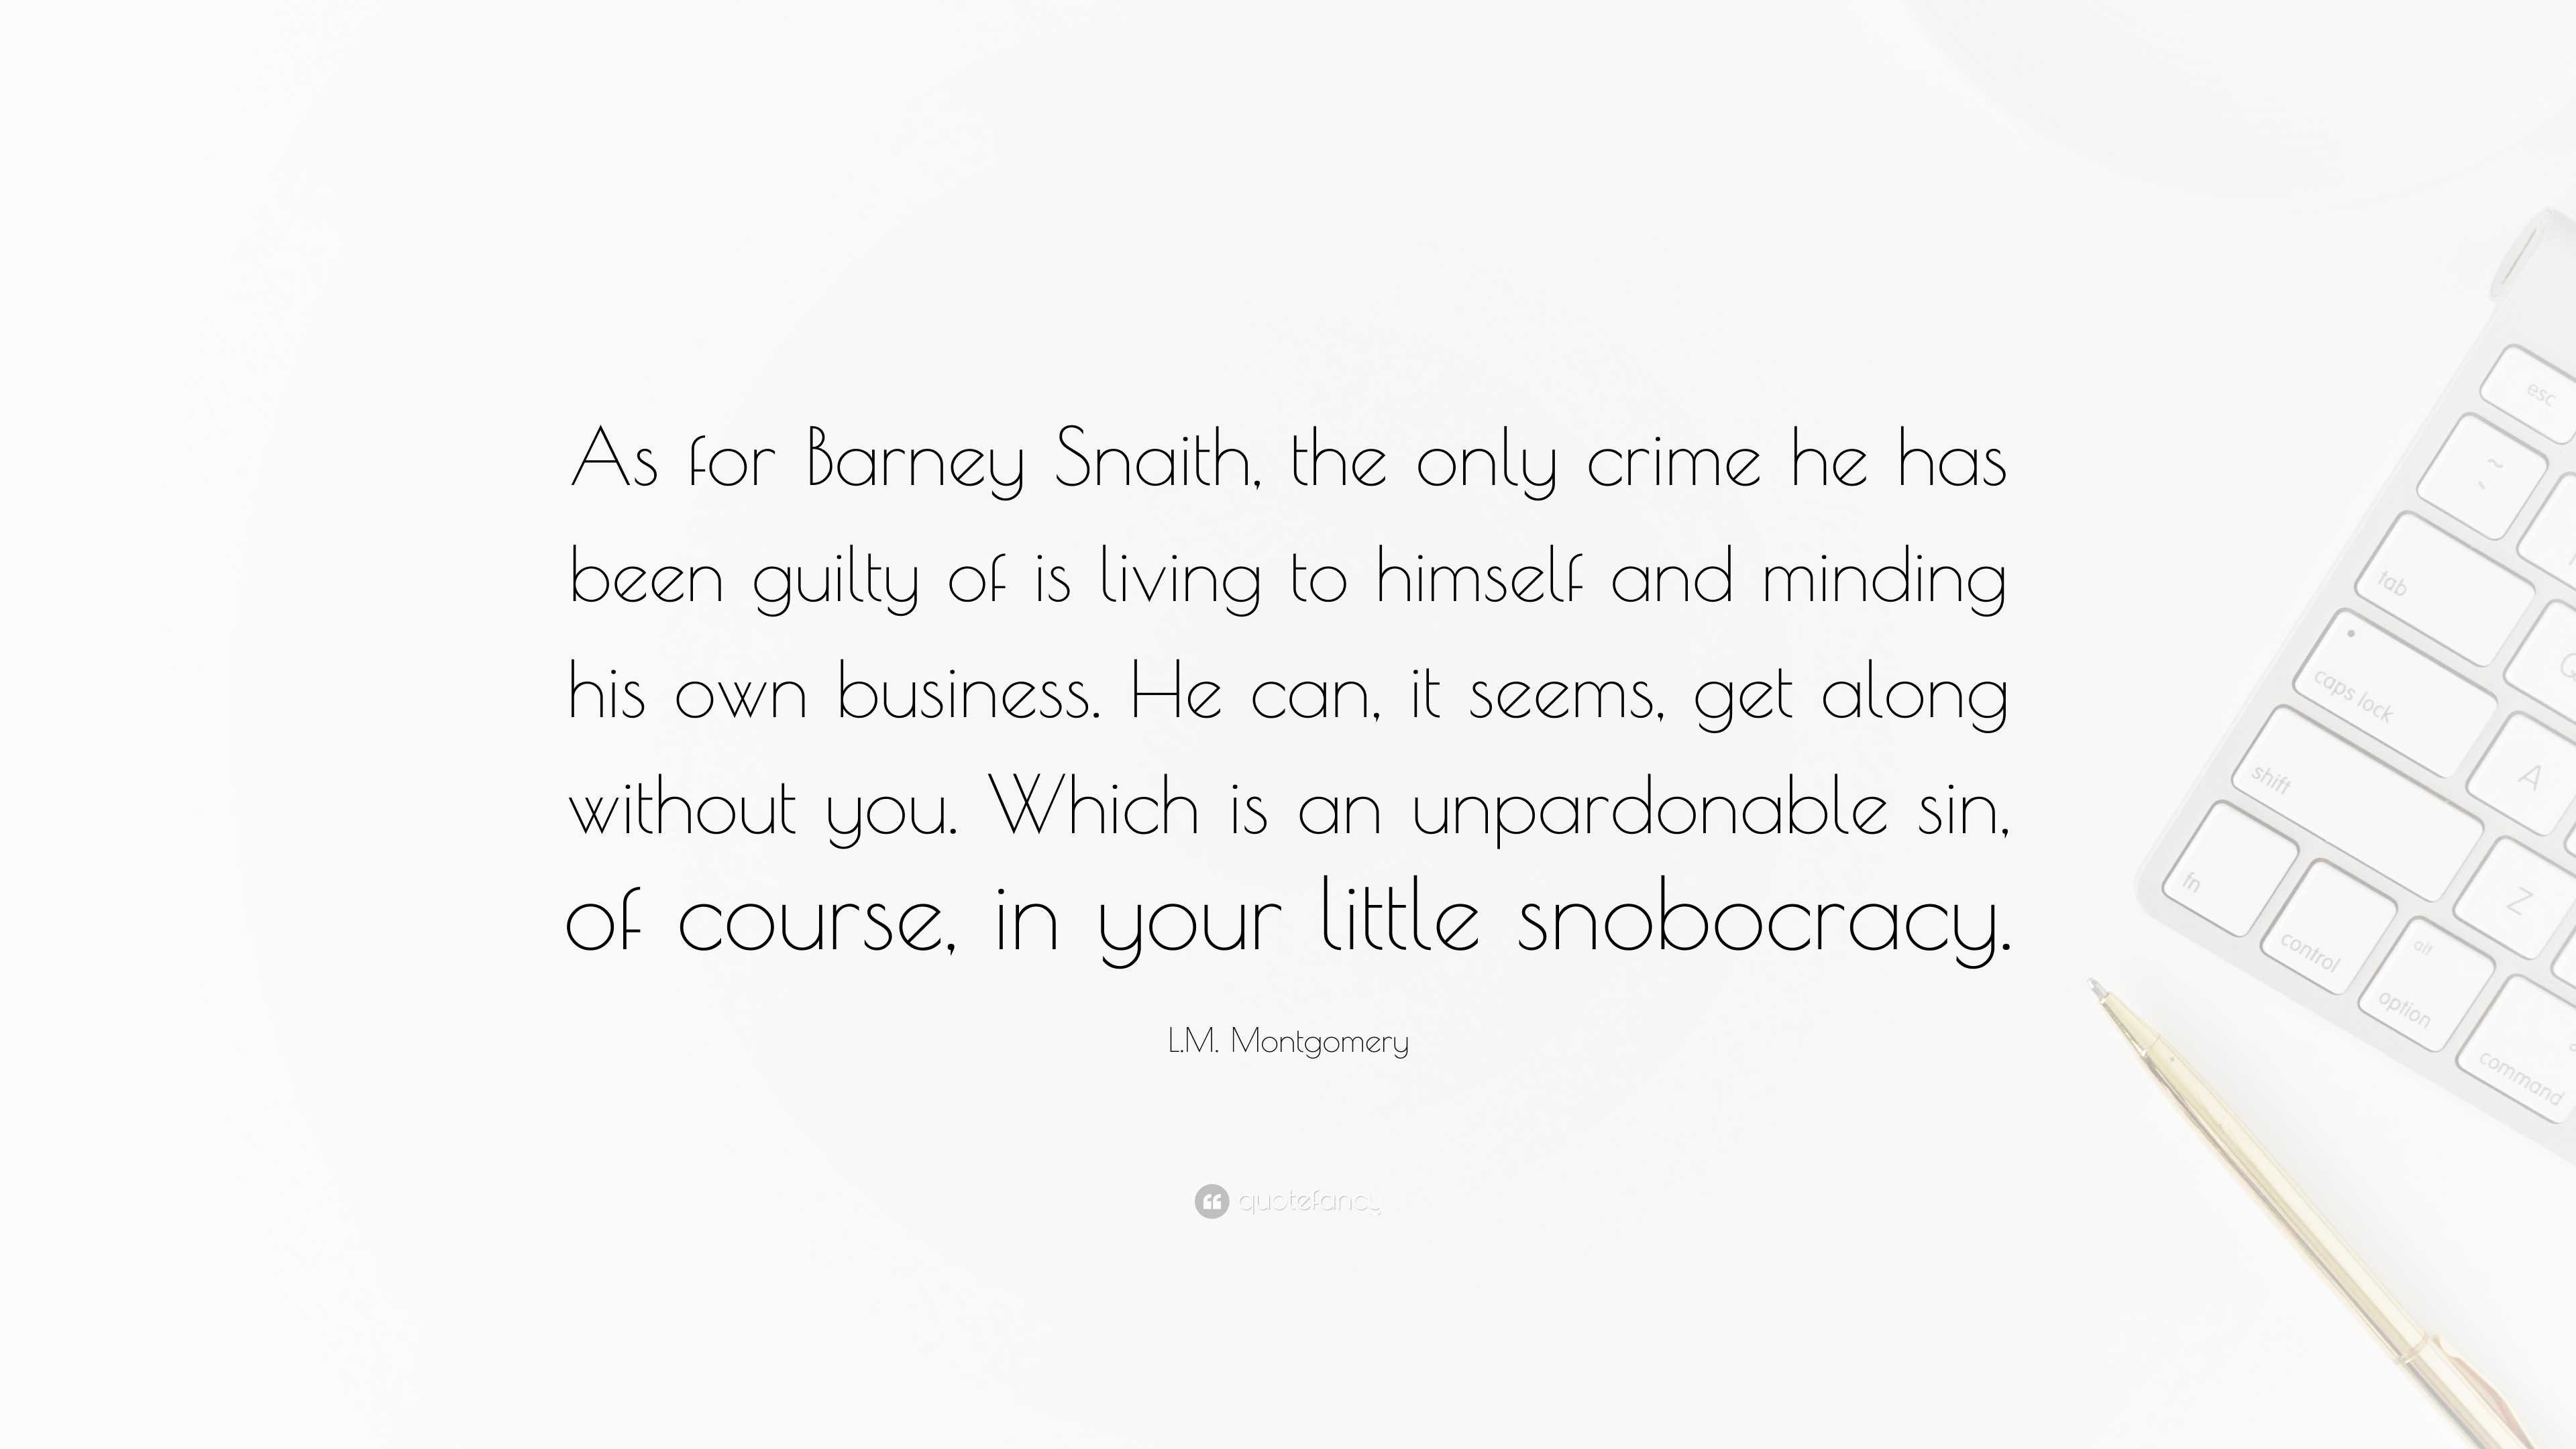 L.M. Montgomery Quote: “As for Barney Snaith, the only crime he has ...